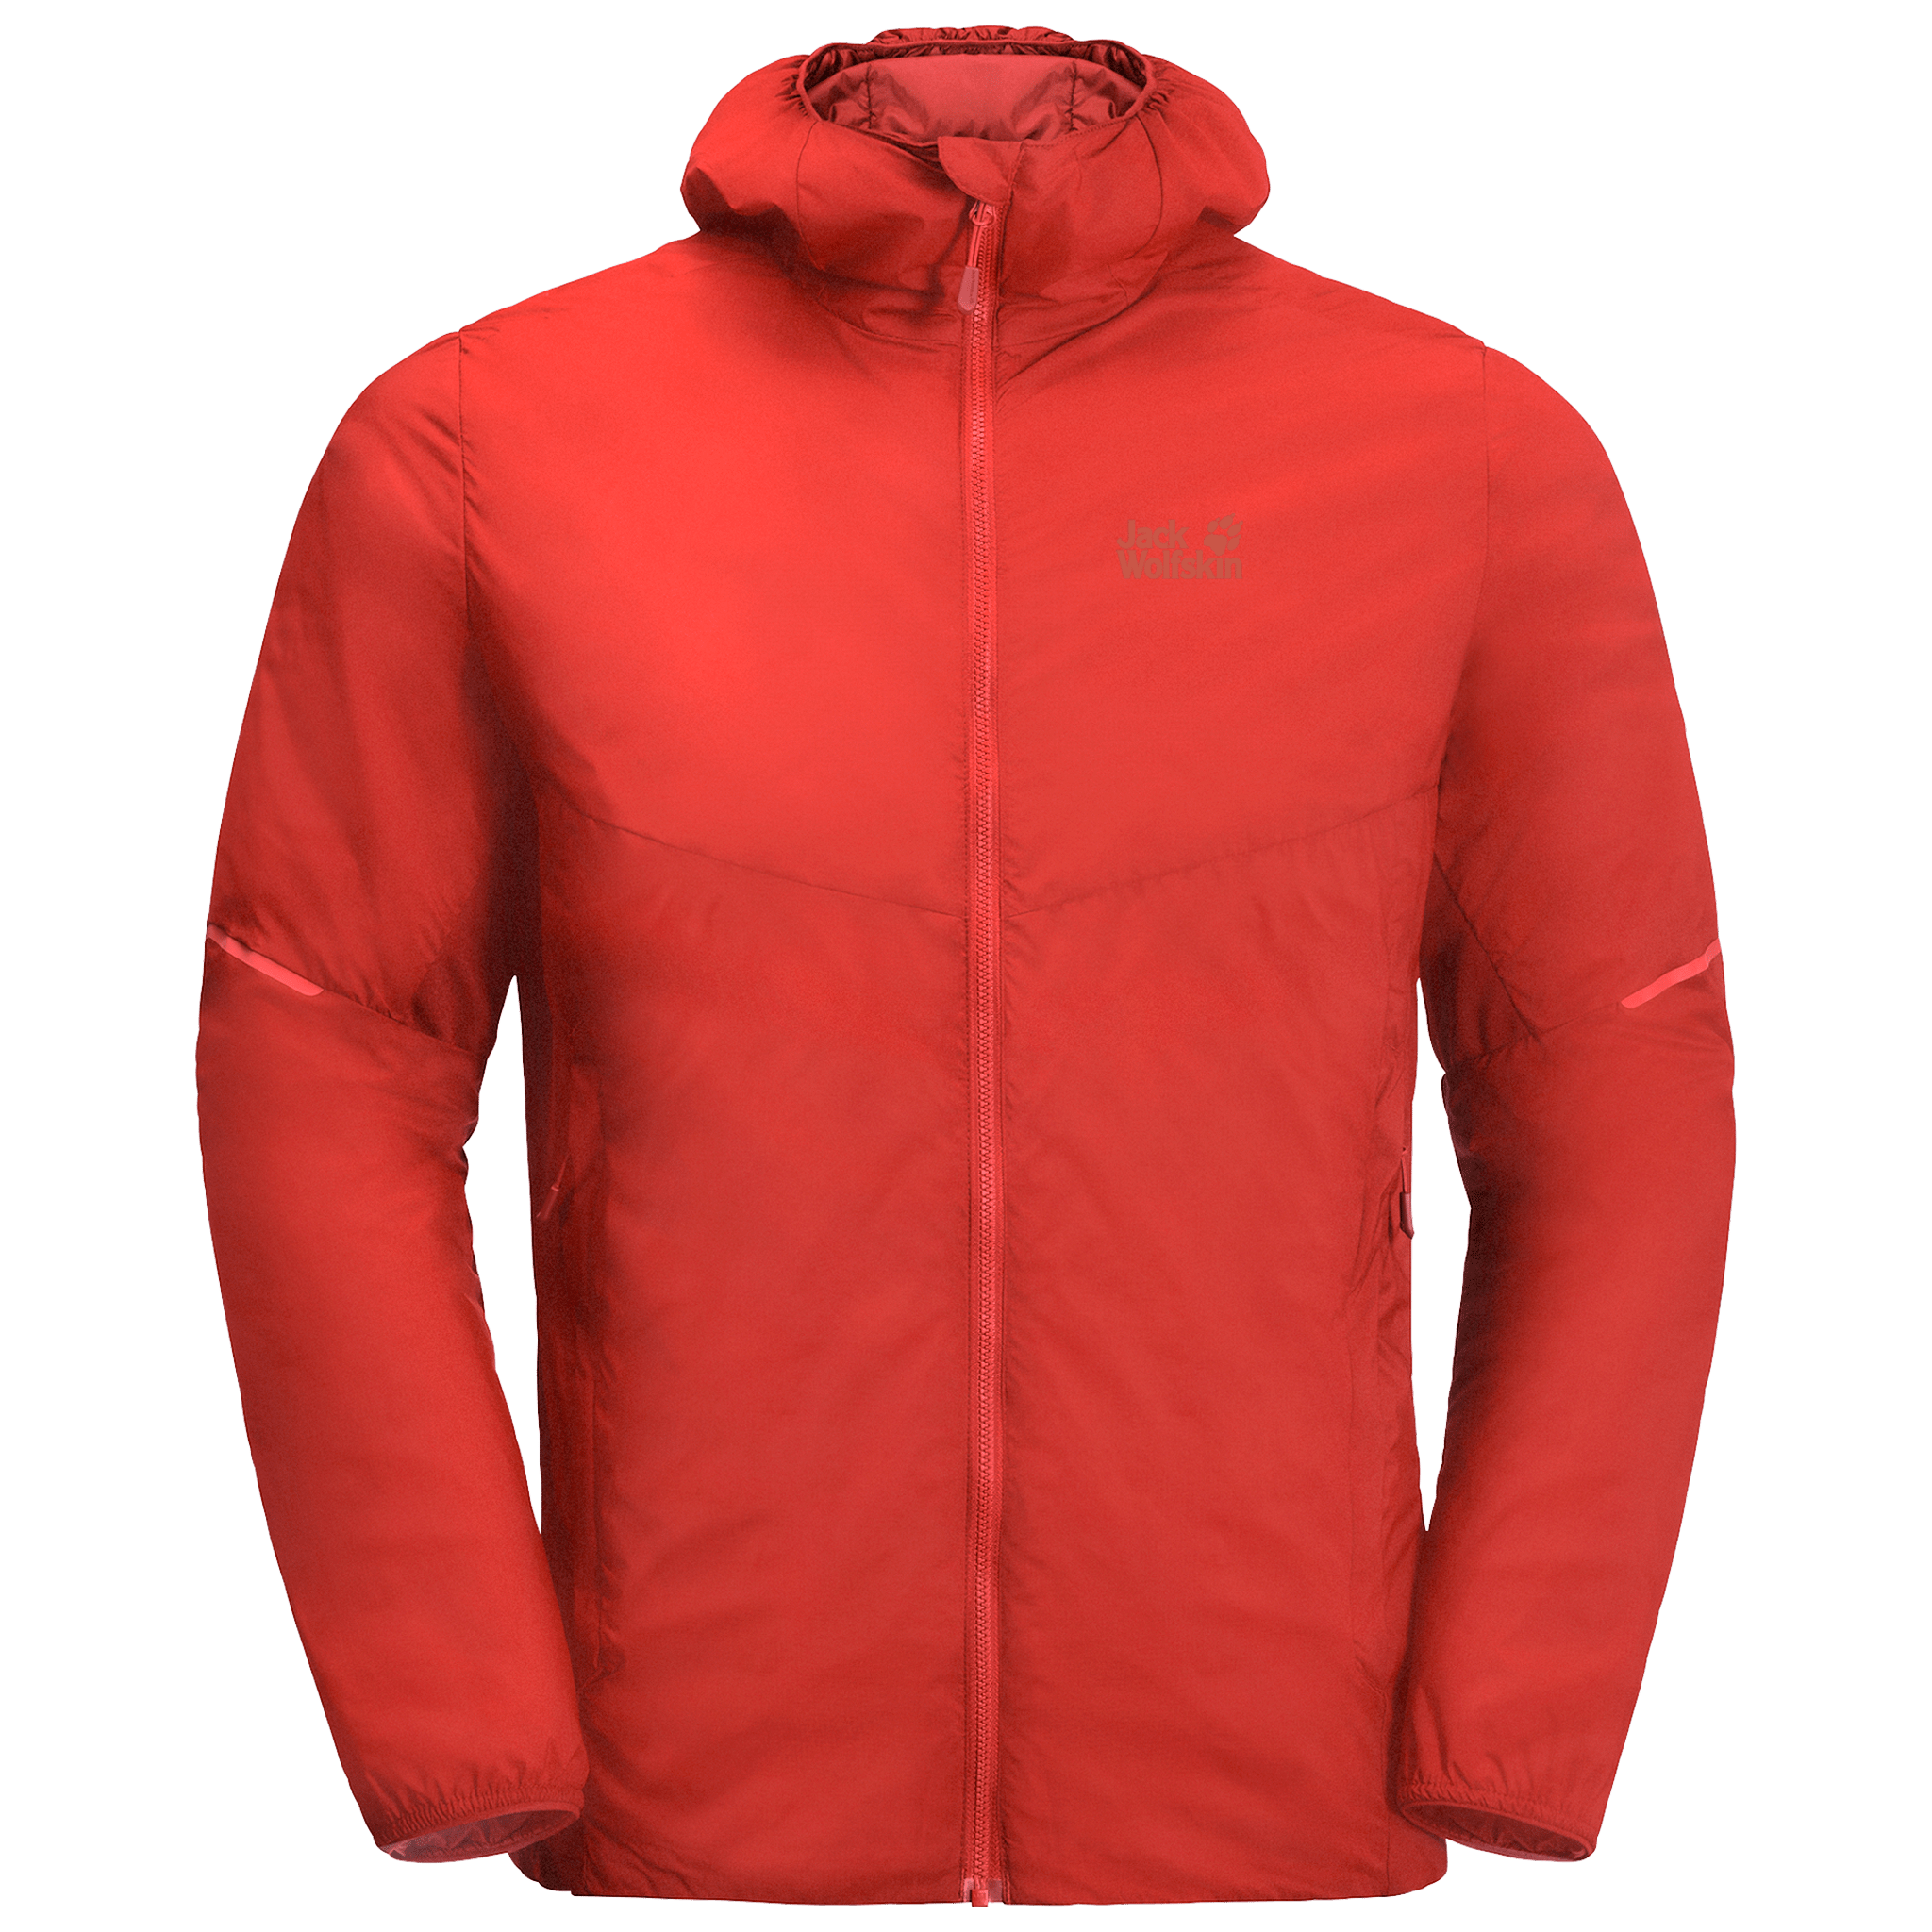 Lava Red Windproof Insulated Jacket Men